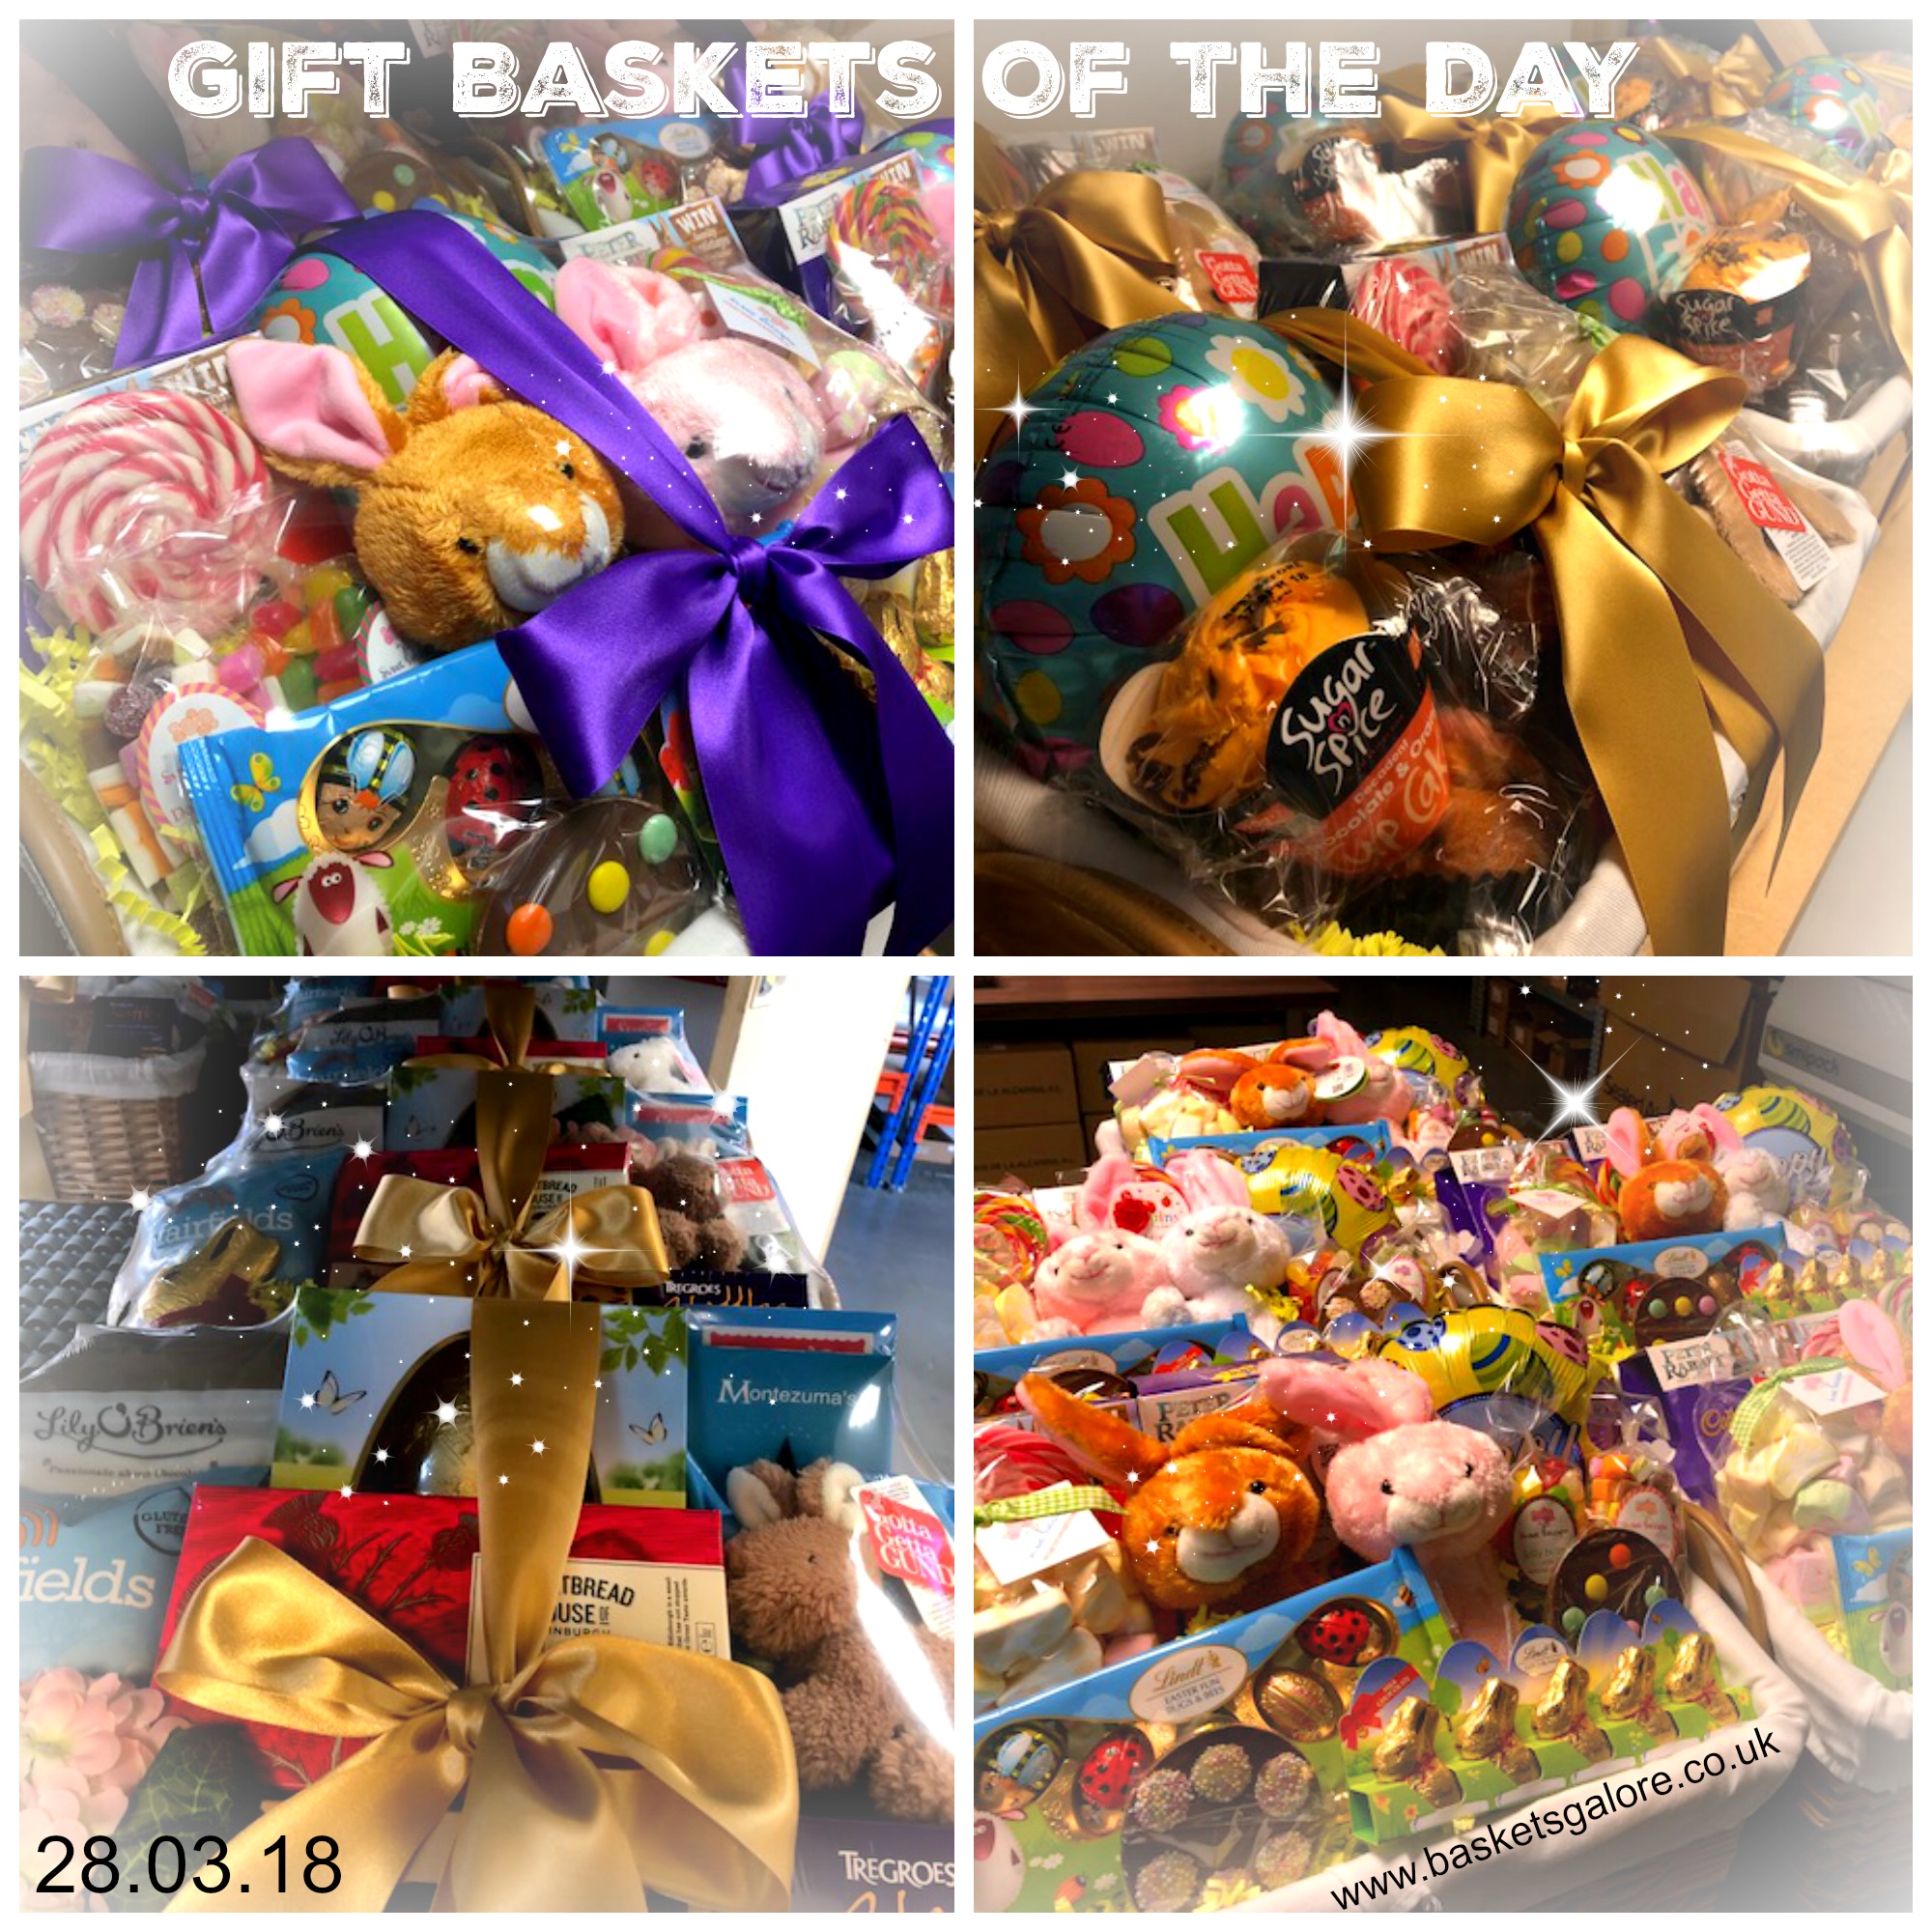 Baskets Galore’s Customer Gifts – Gift Basket of the Day 28.03.18